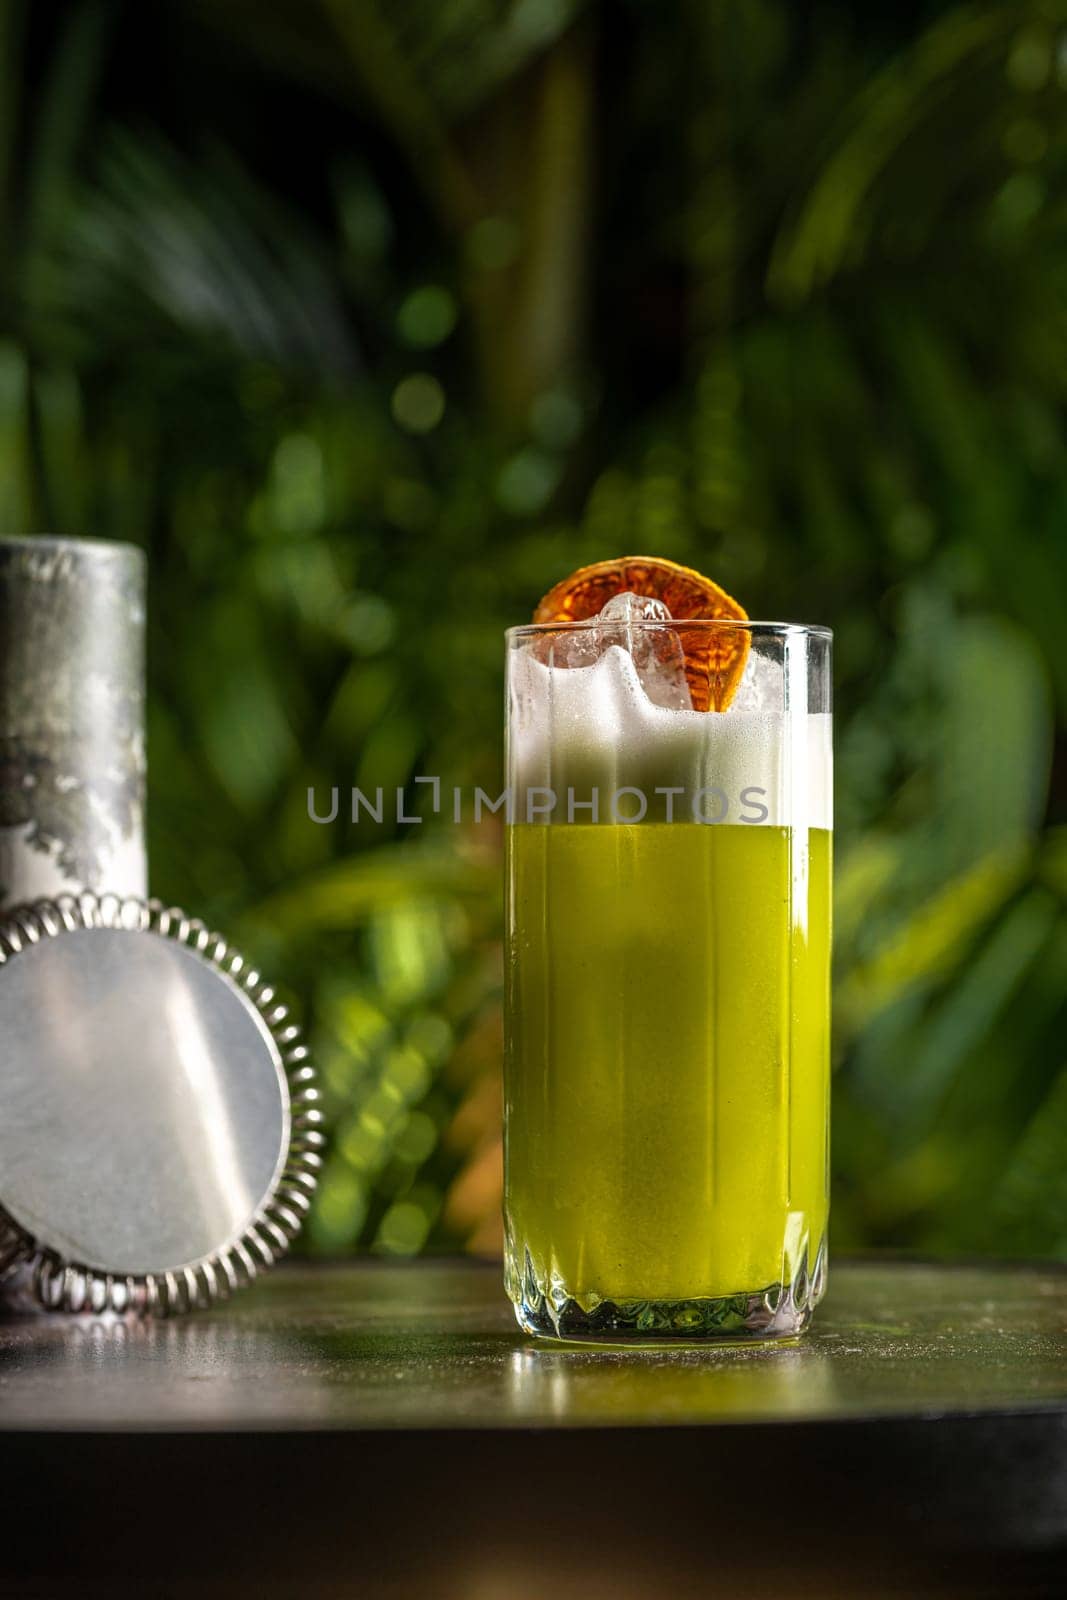 Luxury cocktail on the wooden table on a dark background